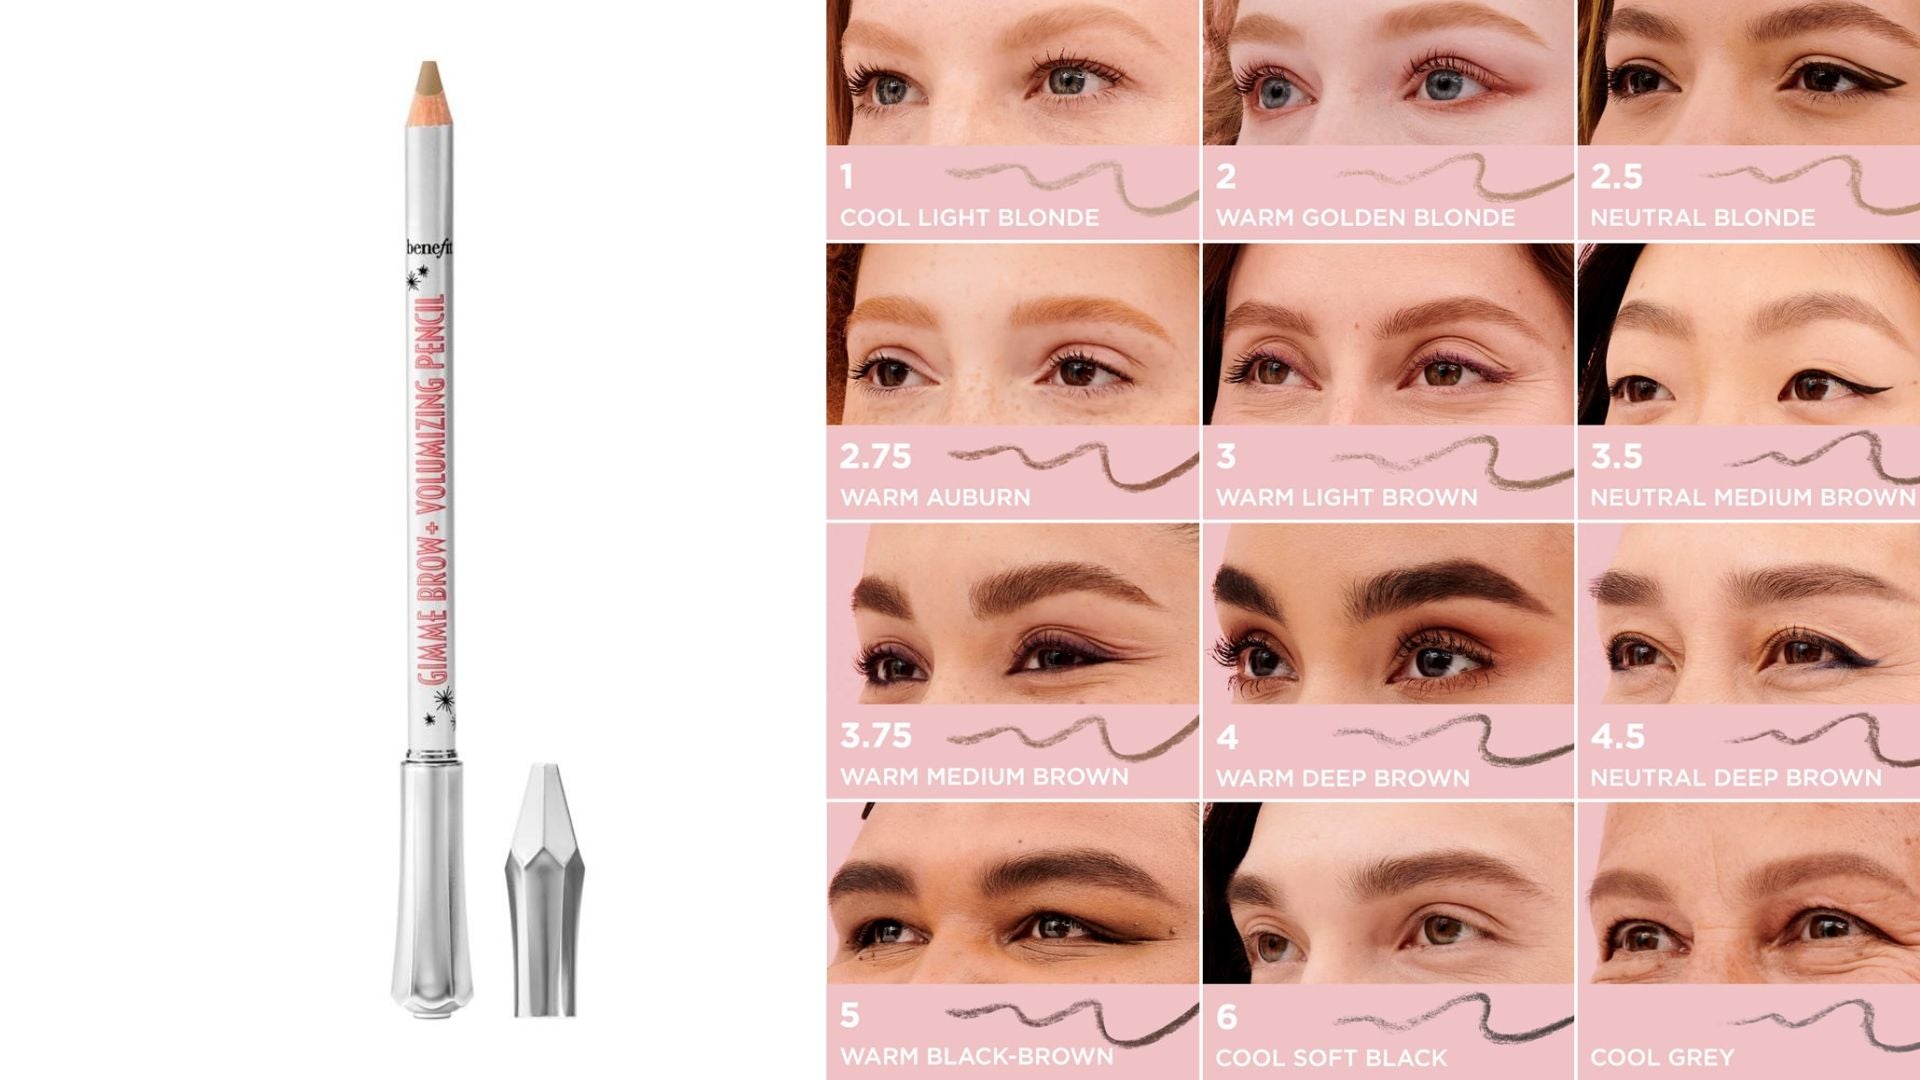 review, photos, ingredients, trends, makeup, swatches, 2022, 2023, benefit cosmetics, gimme brow+ volumizing pencil, best eyebrow pencils, natural looking brows, fiber formula, 12 shades, how to shape and define brows